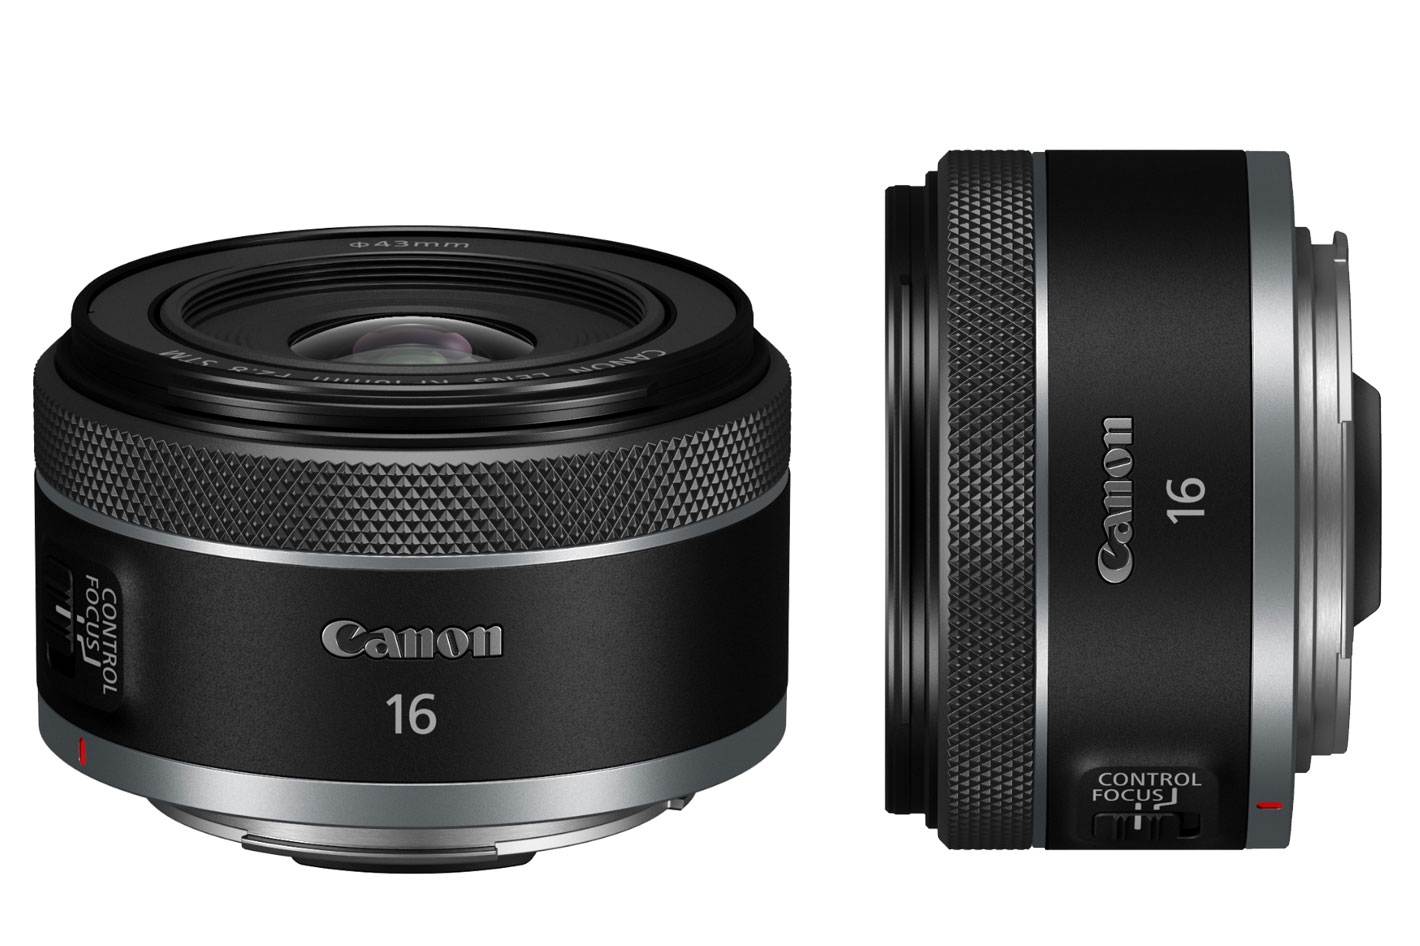 Canon’s new RF lenses: a 16mm F2.8 and 100-400mm F5.6-8